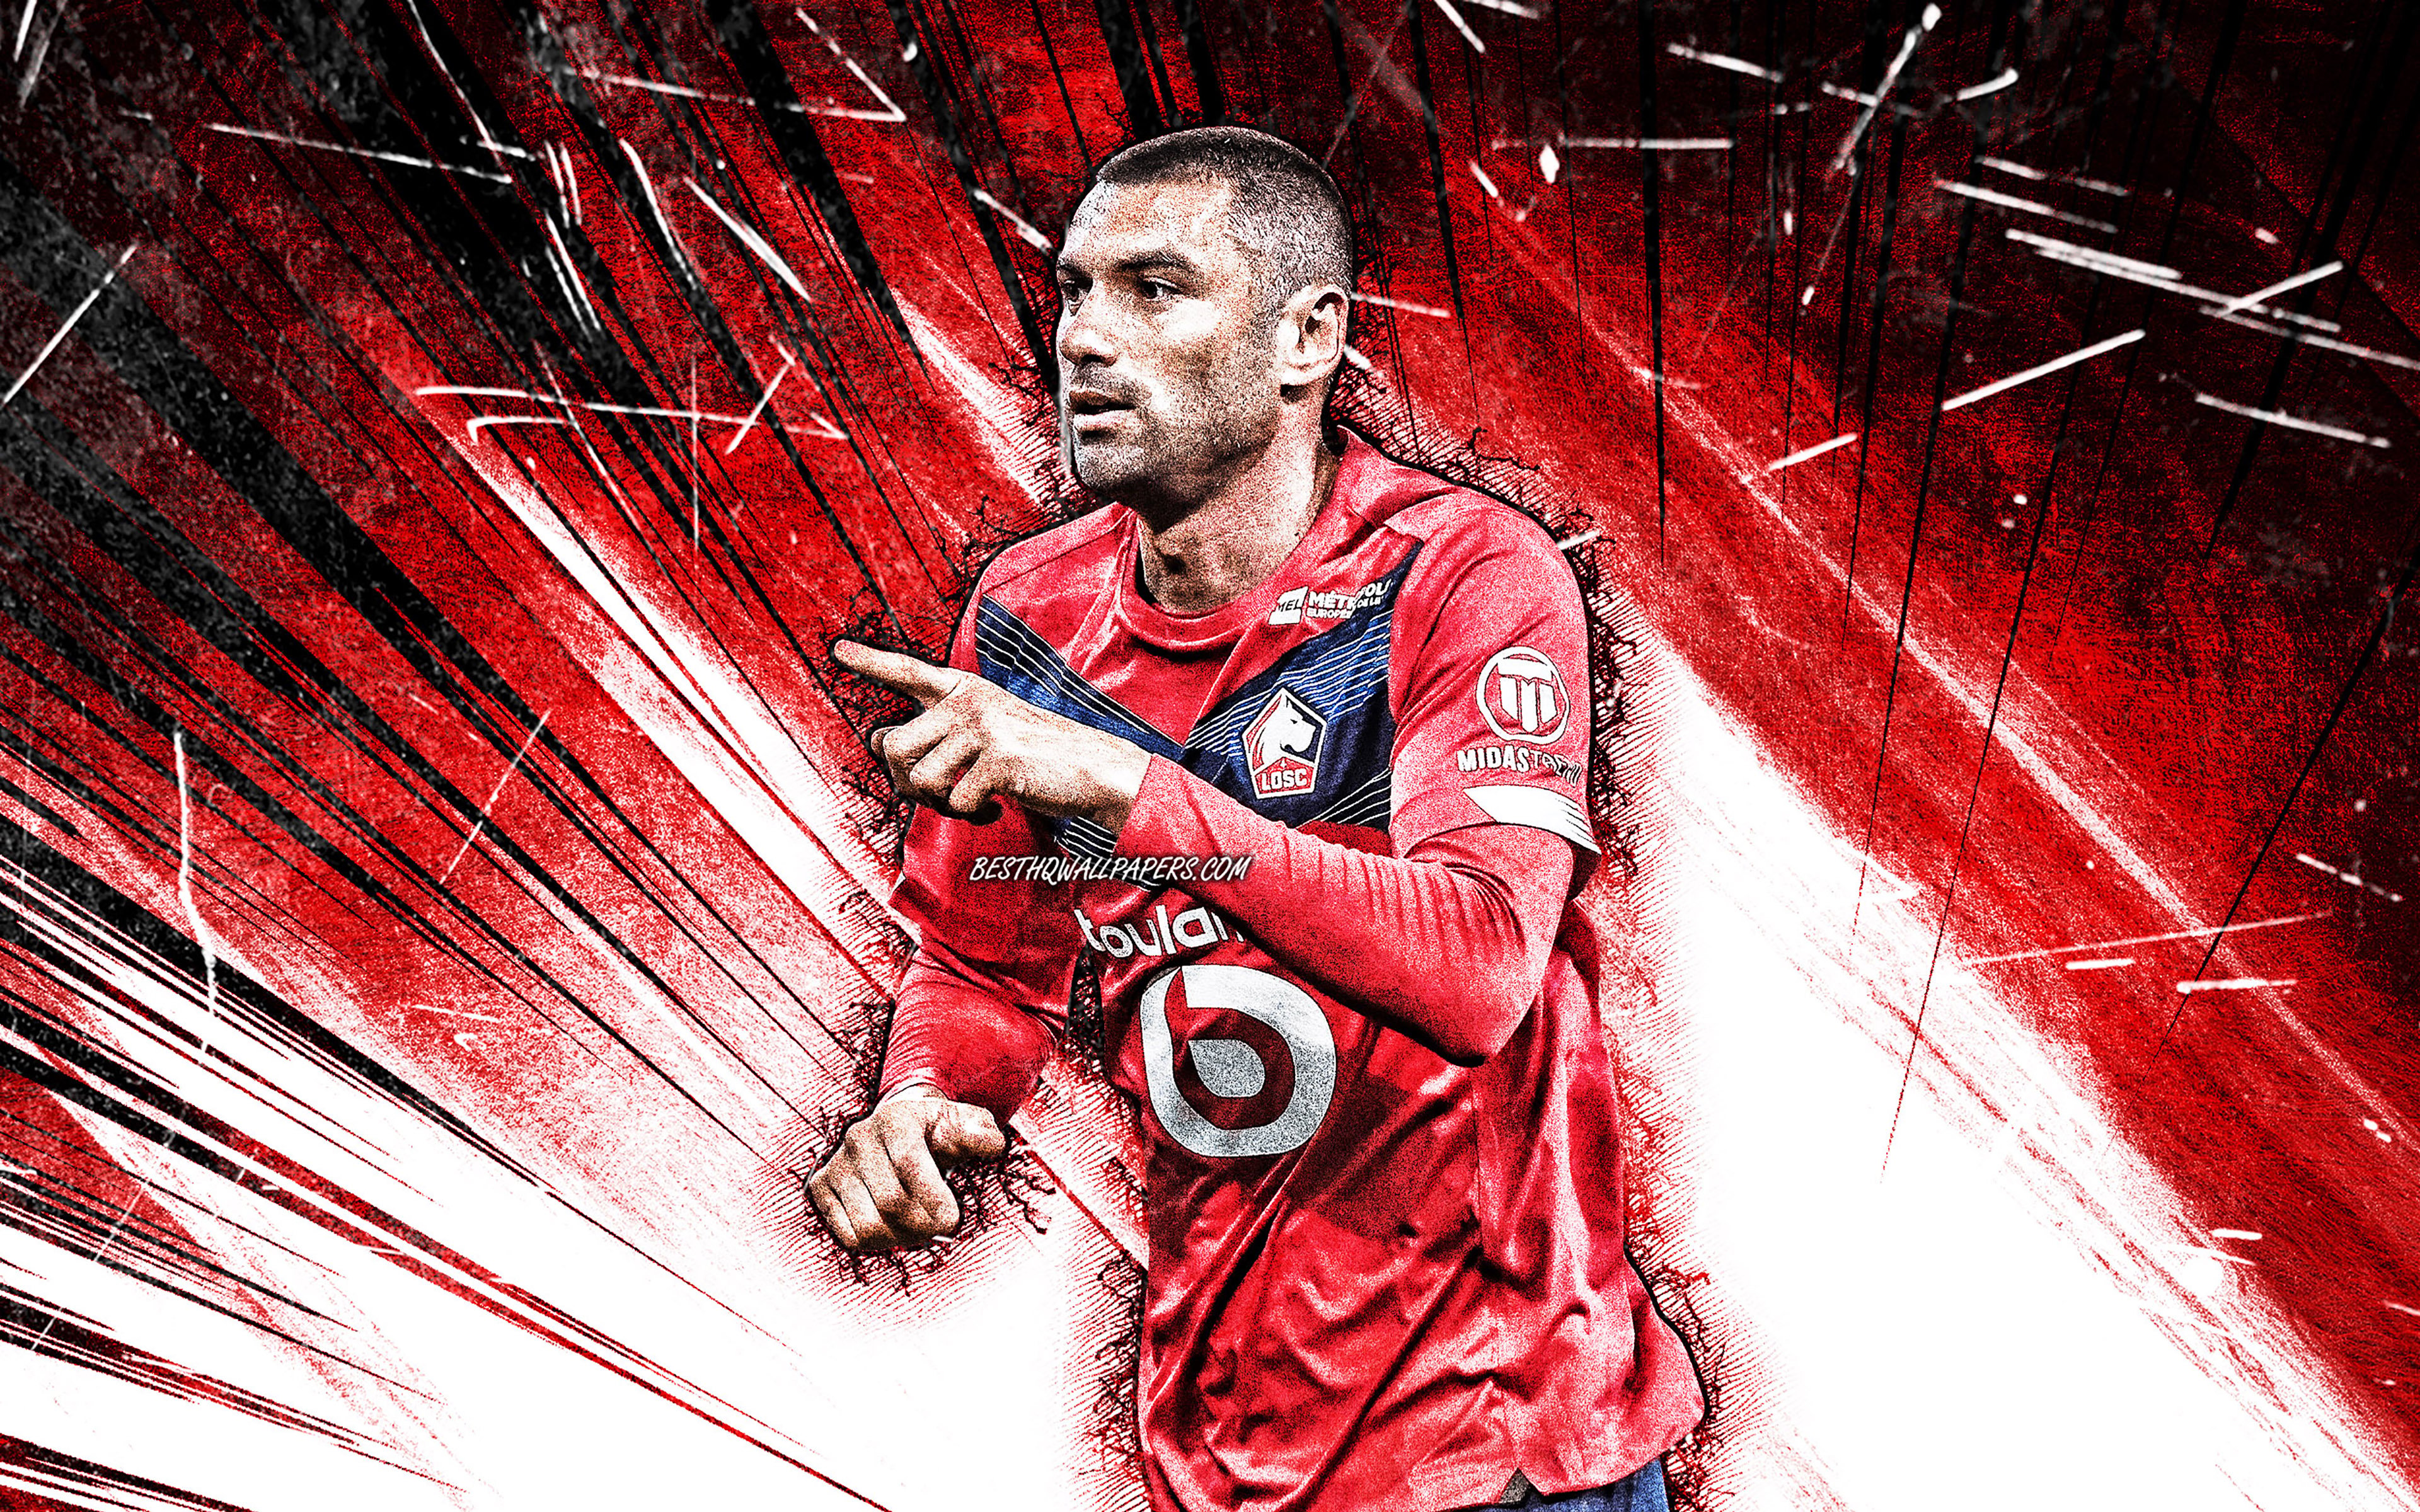 Download wallpaper 4k, Burak Yilmaz, grunge art, turkish footballers, Lille FC, Ligue soccer, red abstract rays, LOSC Lille, Burak Yilmaz 4K, Burak Yilmaz Lille for desktop with resolution 3840x2400. High Quality